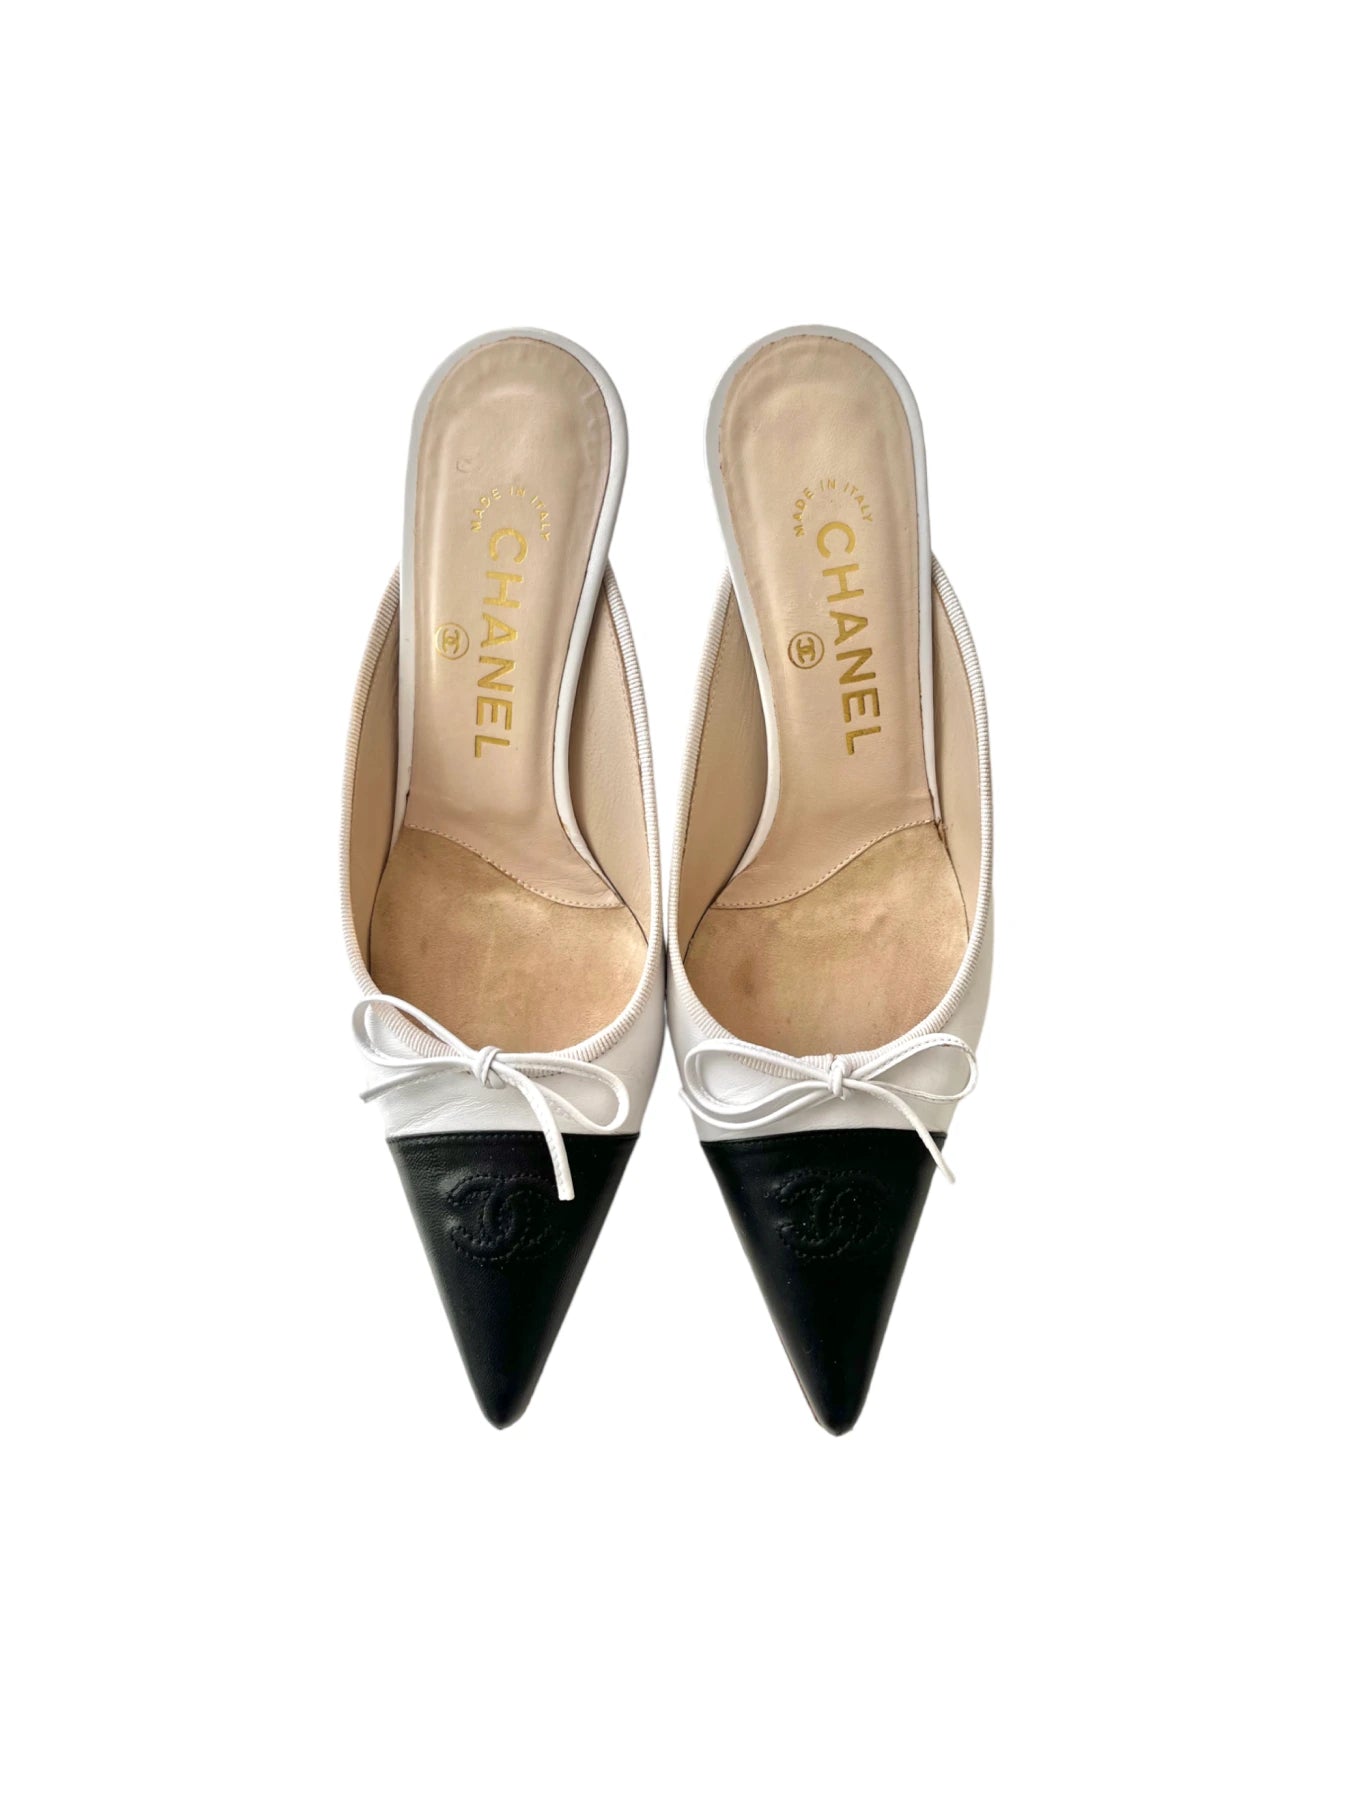 CHANEL Bow Vintage Mules, 36.5 – Archive Square